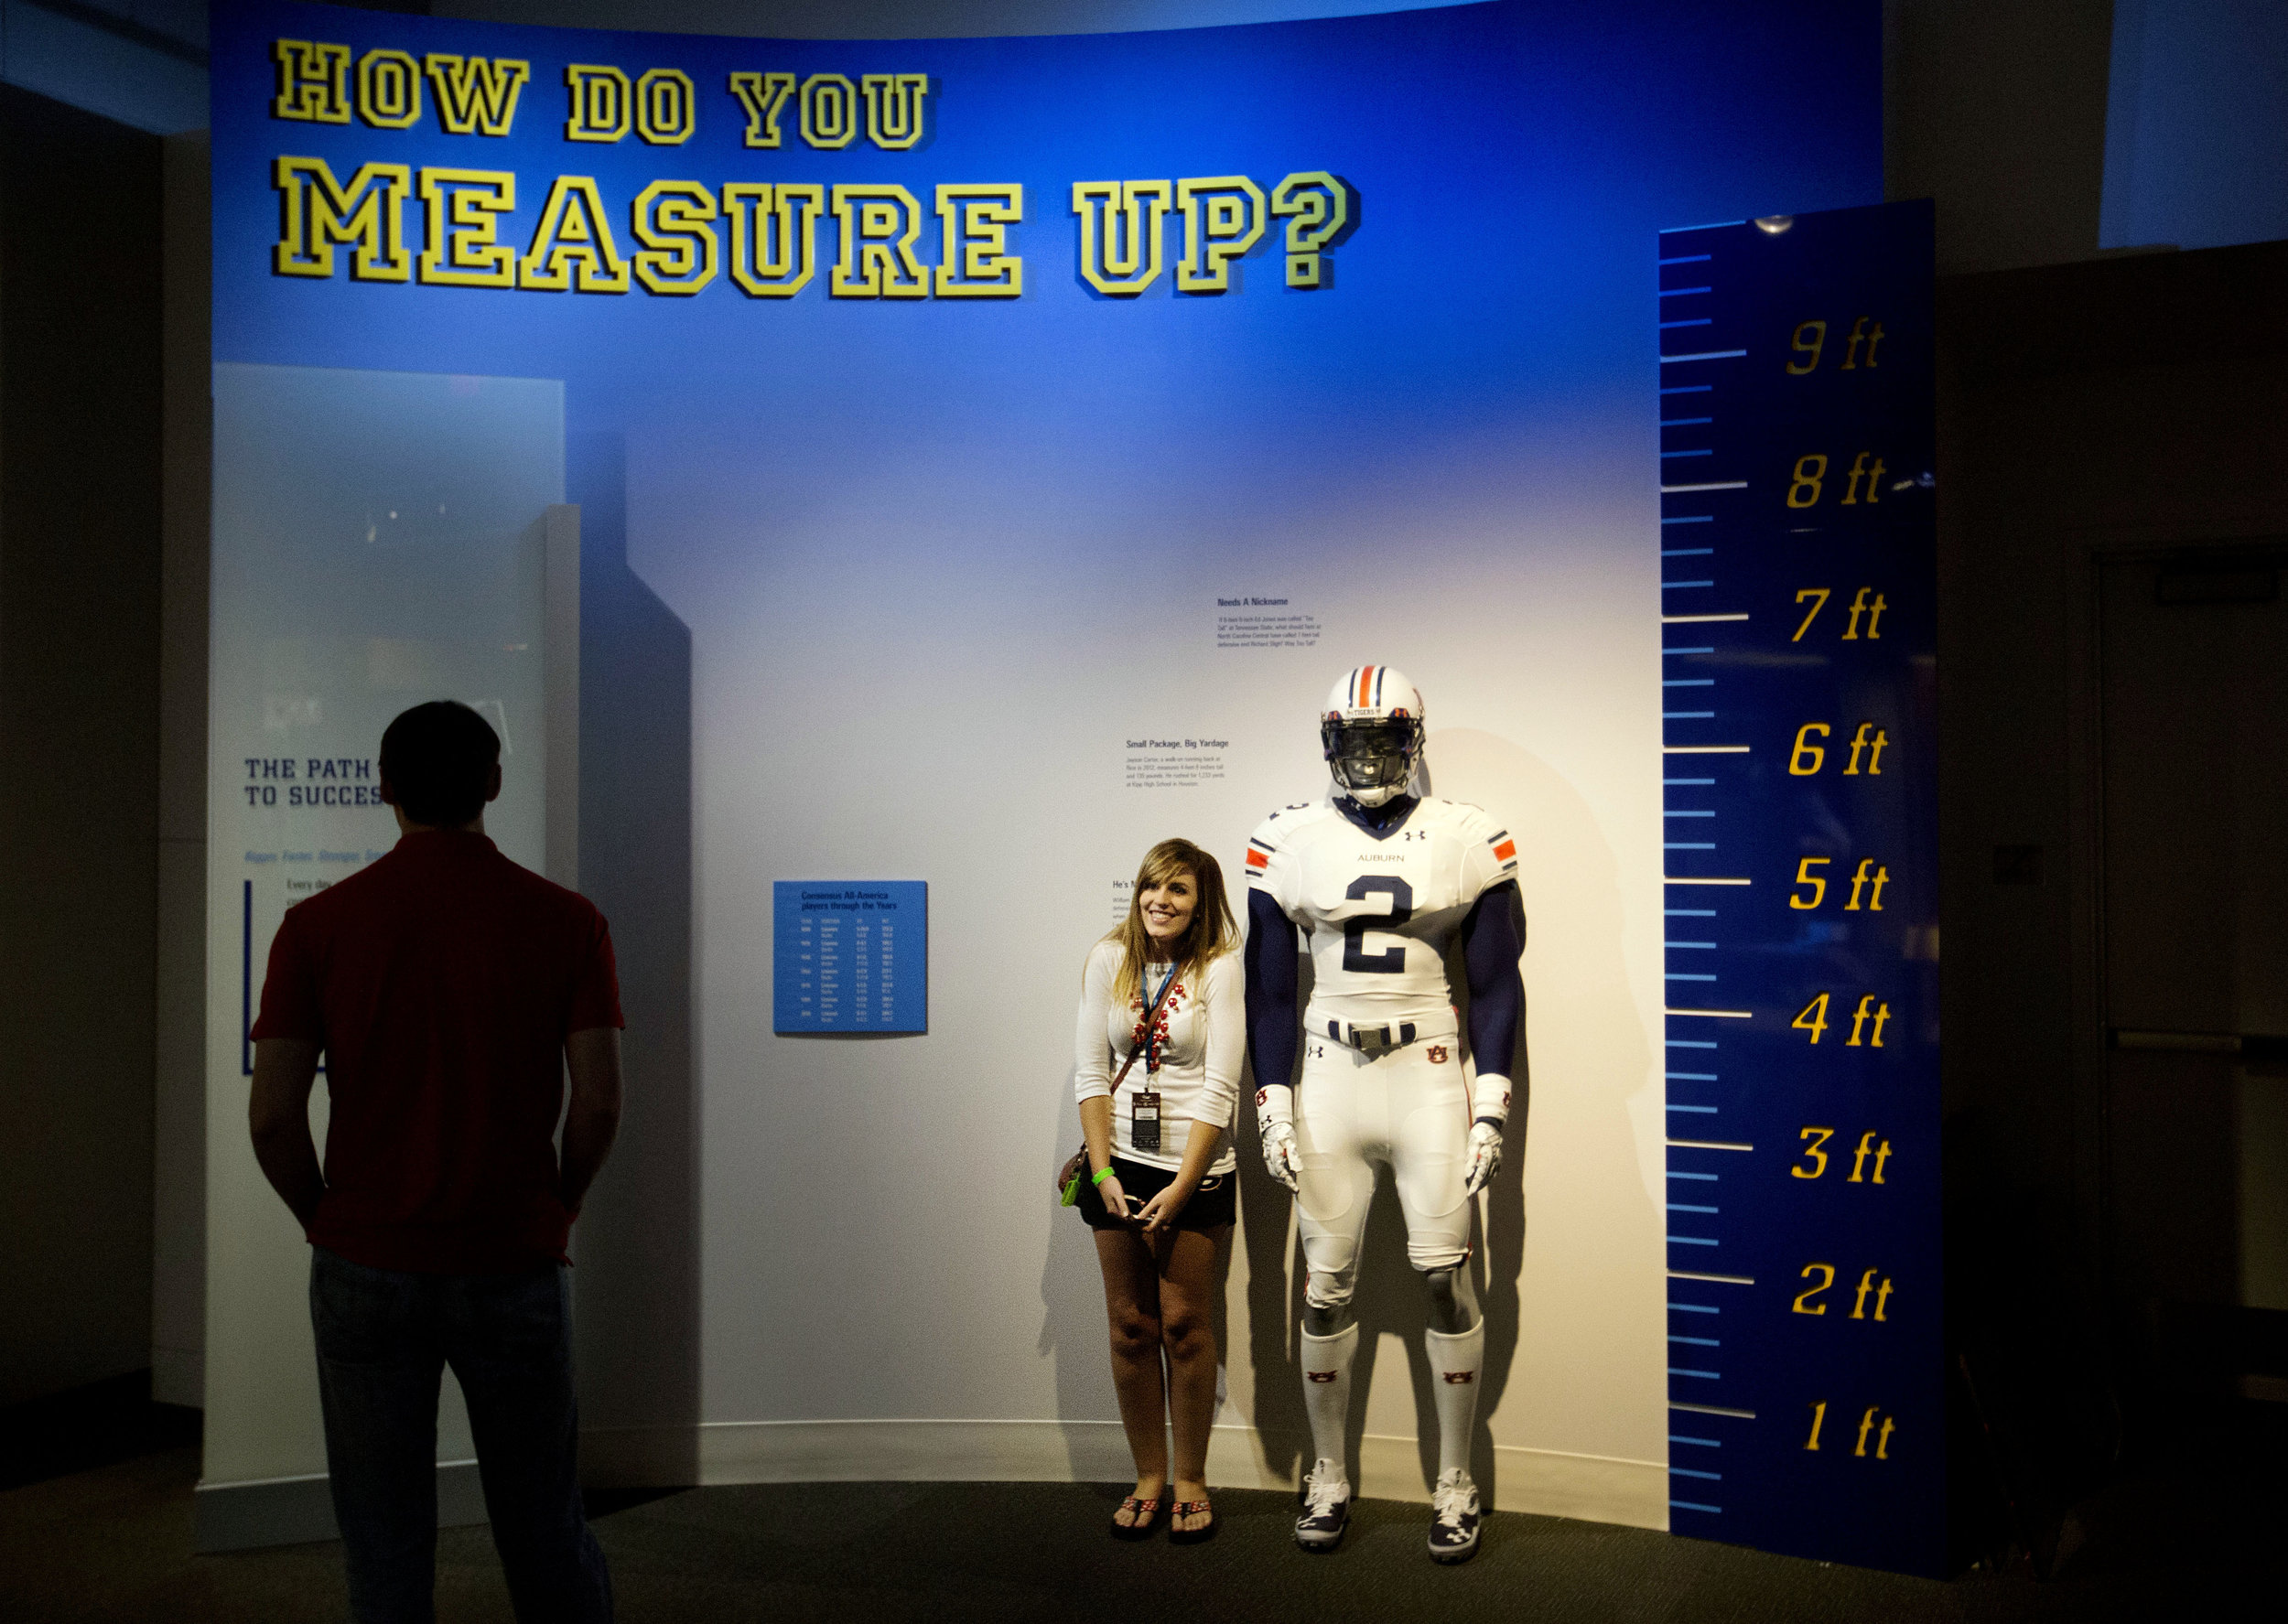  Joanna Jinright, of Dalton, Ga., right, measures herself next to a mannequin of a football player as Anders Ravenholt, of Chattanooga, Tenn., left, looks on during a tour of the College Football Hall of Fame, Wednesday, Aug. 13, 2014, in Atlanta. On